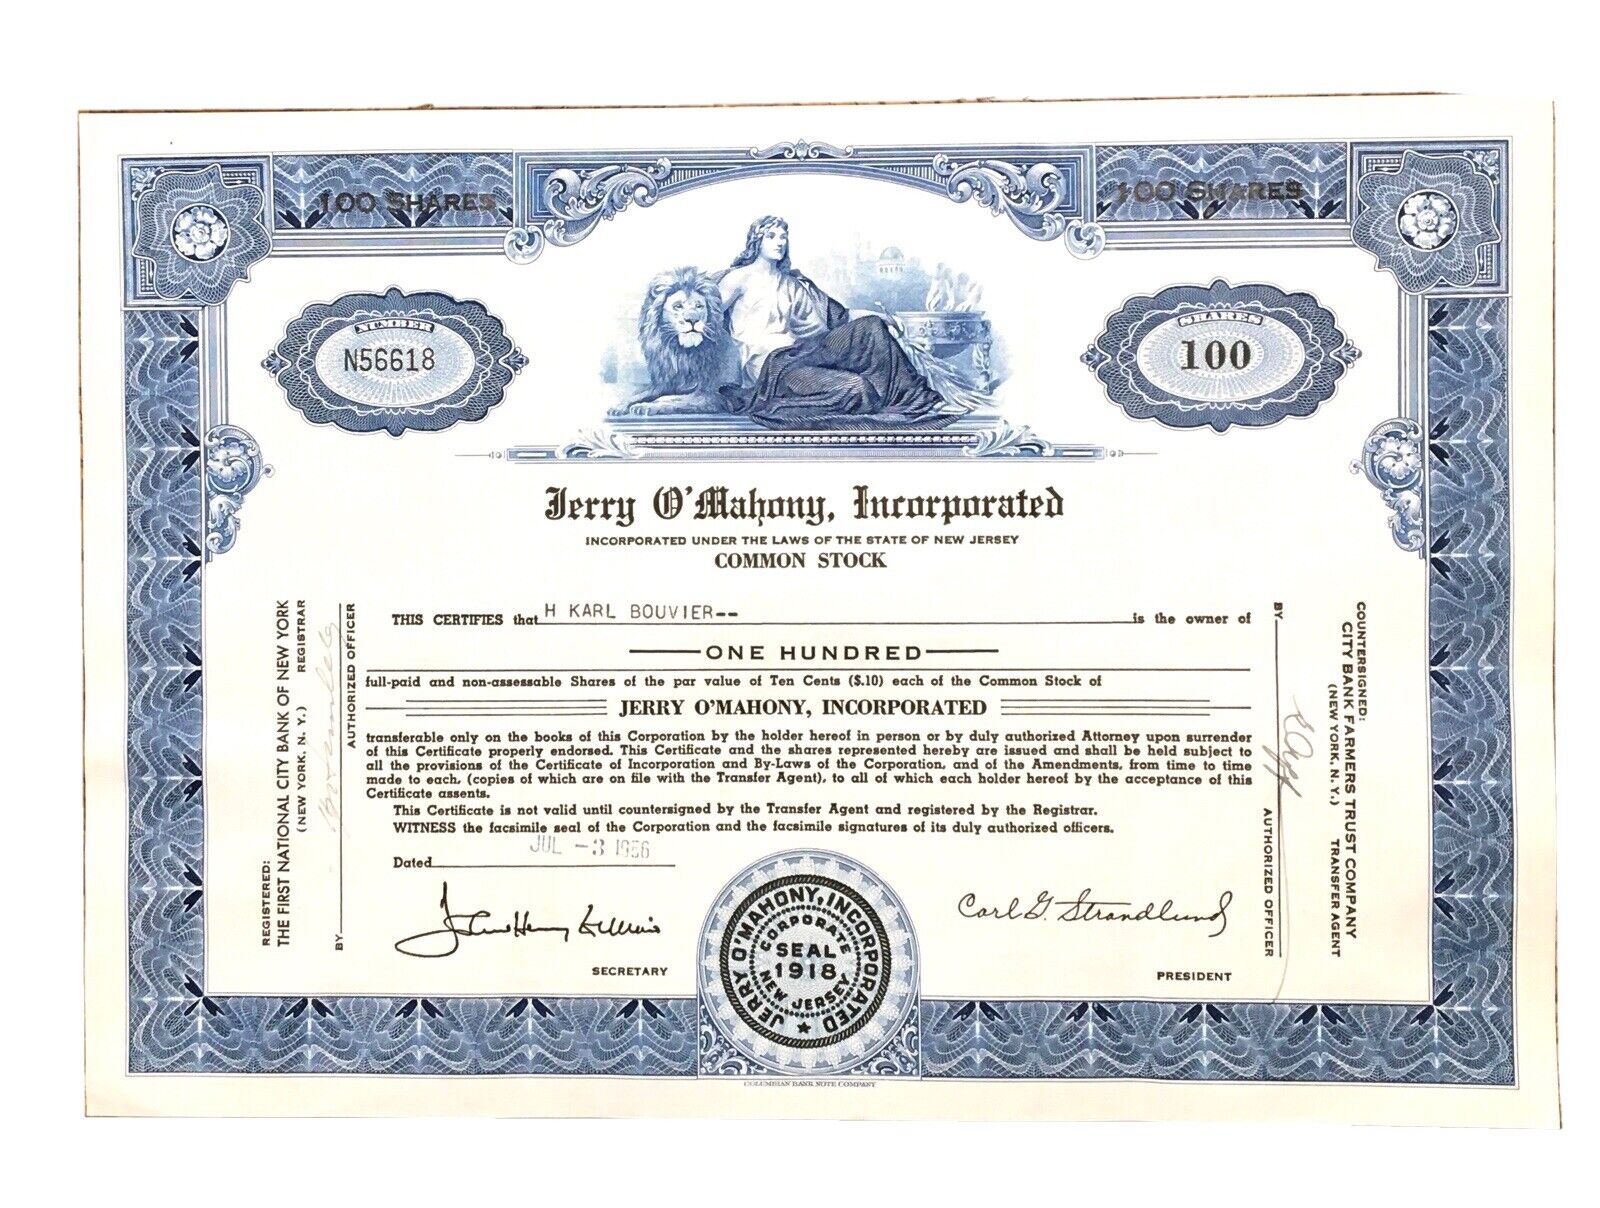 Jerry O’Mahoney Inc. American Diner Registered Vintage Color Stock Certificate